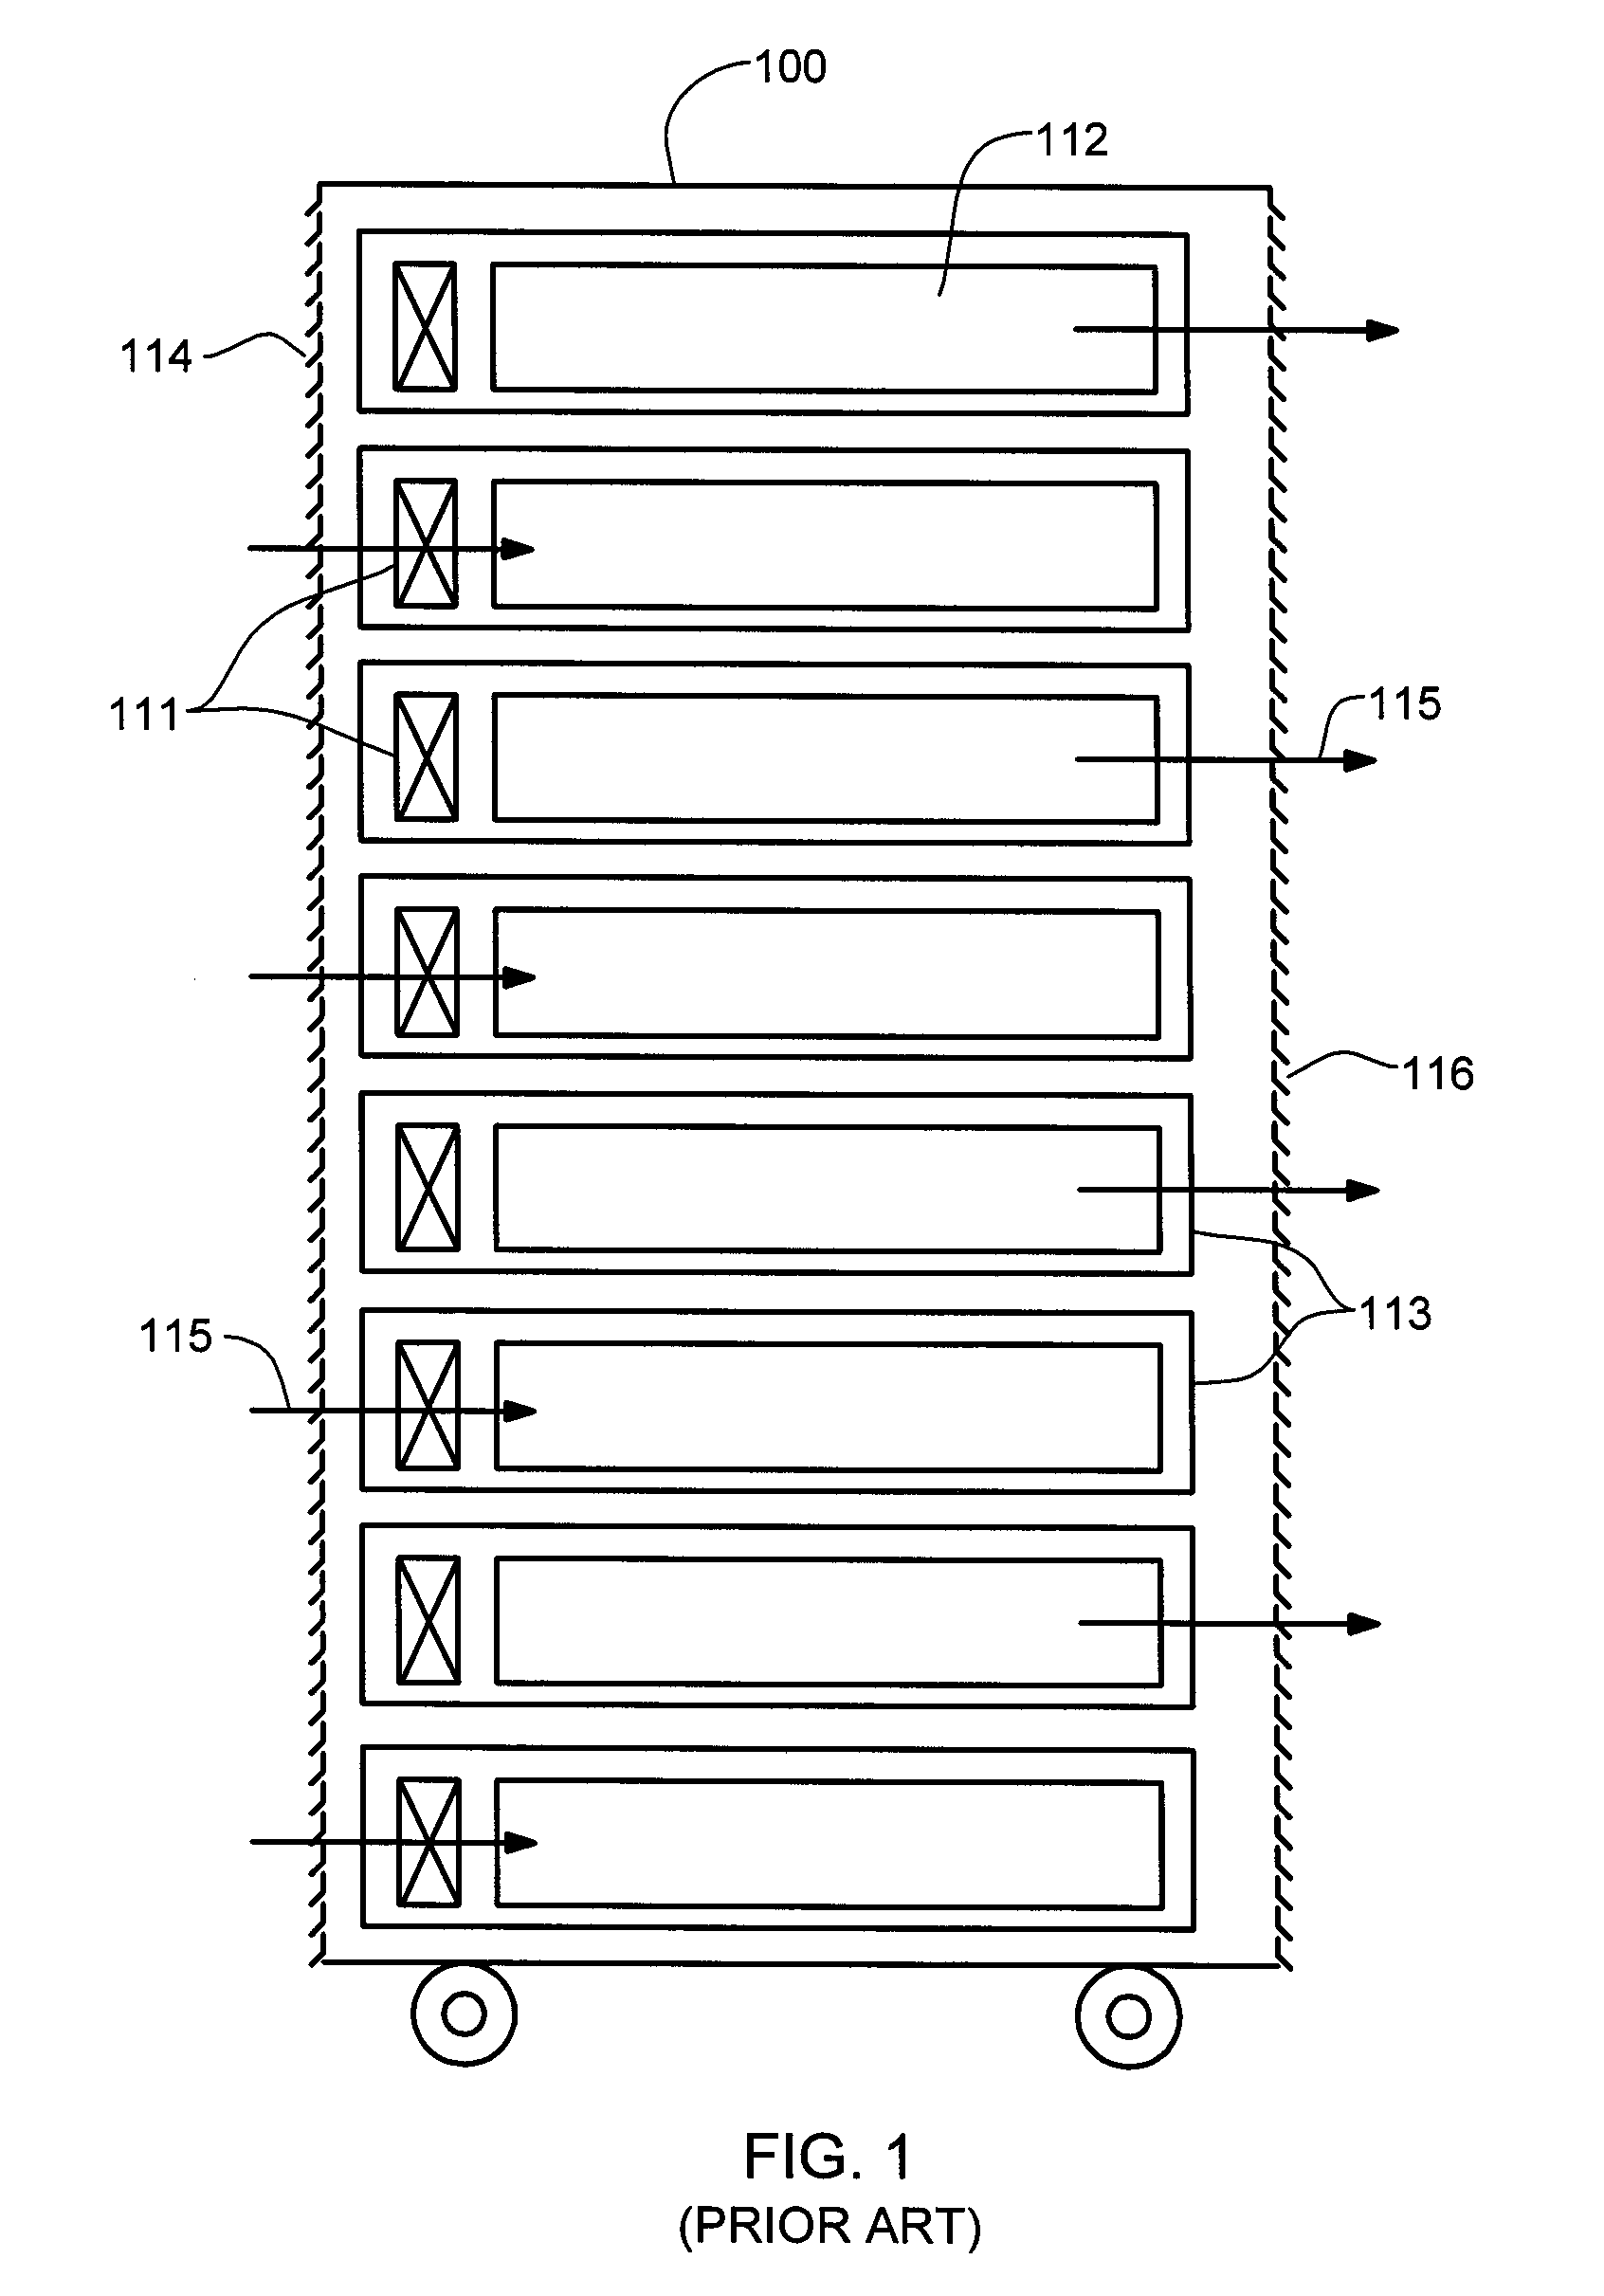 Hybrid cooling system and method for a multi-component electronics system